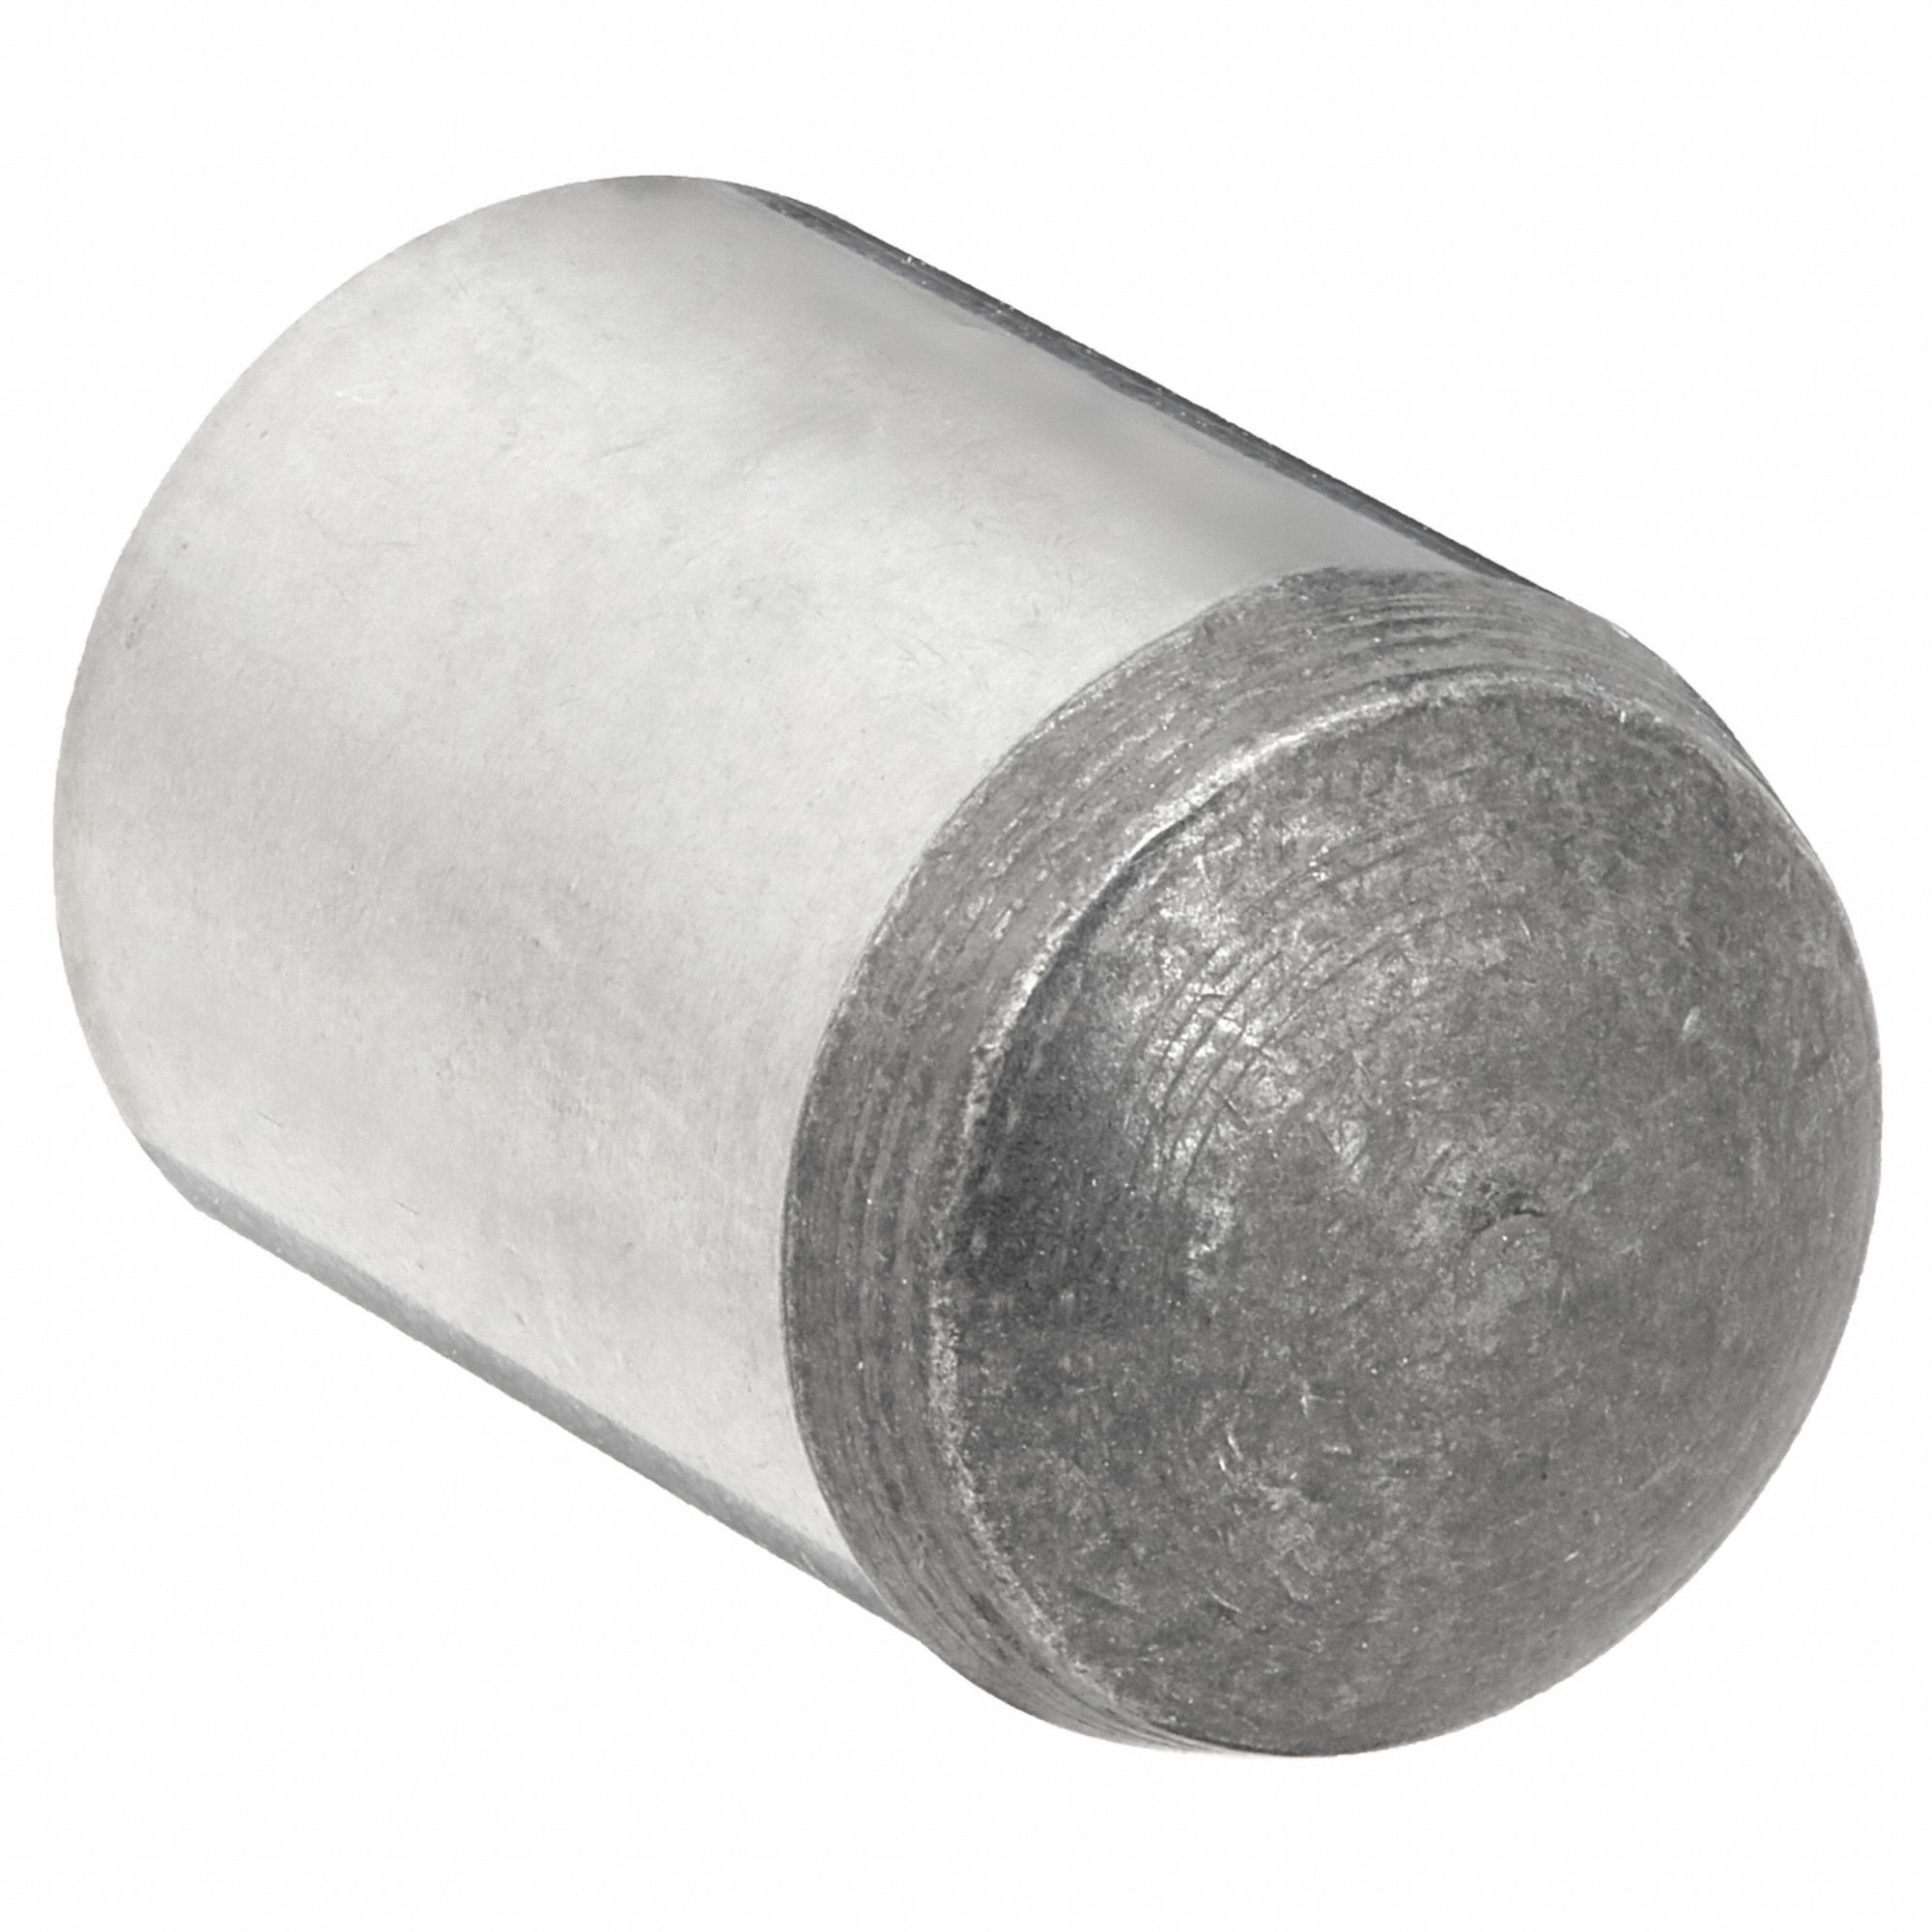 1/2 x 2 Dowel Pins 18-8 Stainless Steel .0002 Oversize